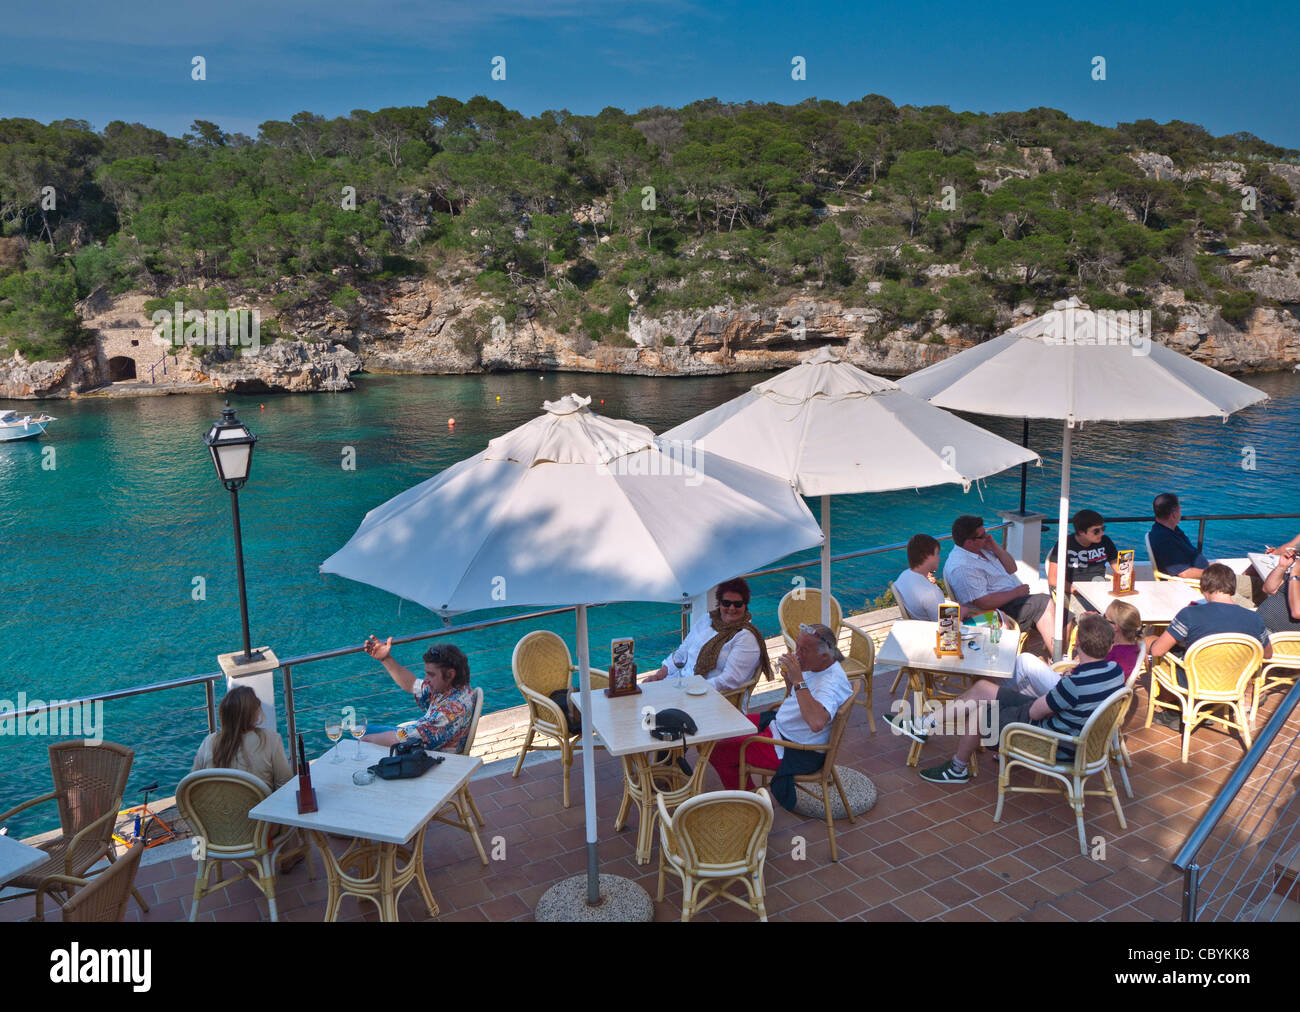 Cala Figuera harbour cafe and visitors Mallorca Balearic Islands Spain Stock Photo